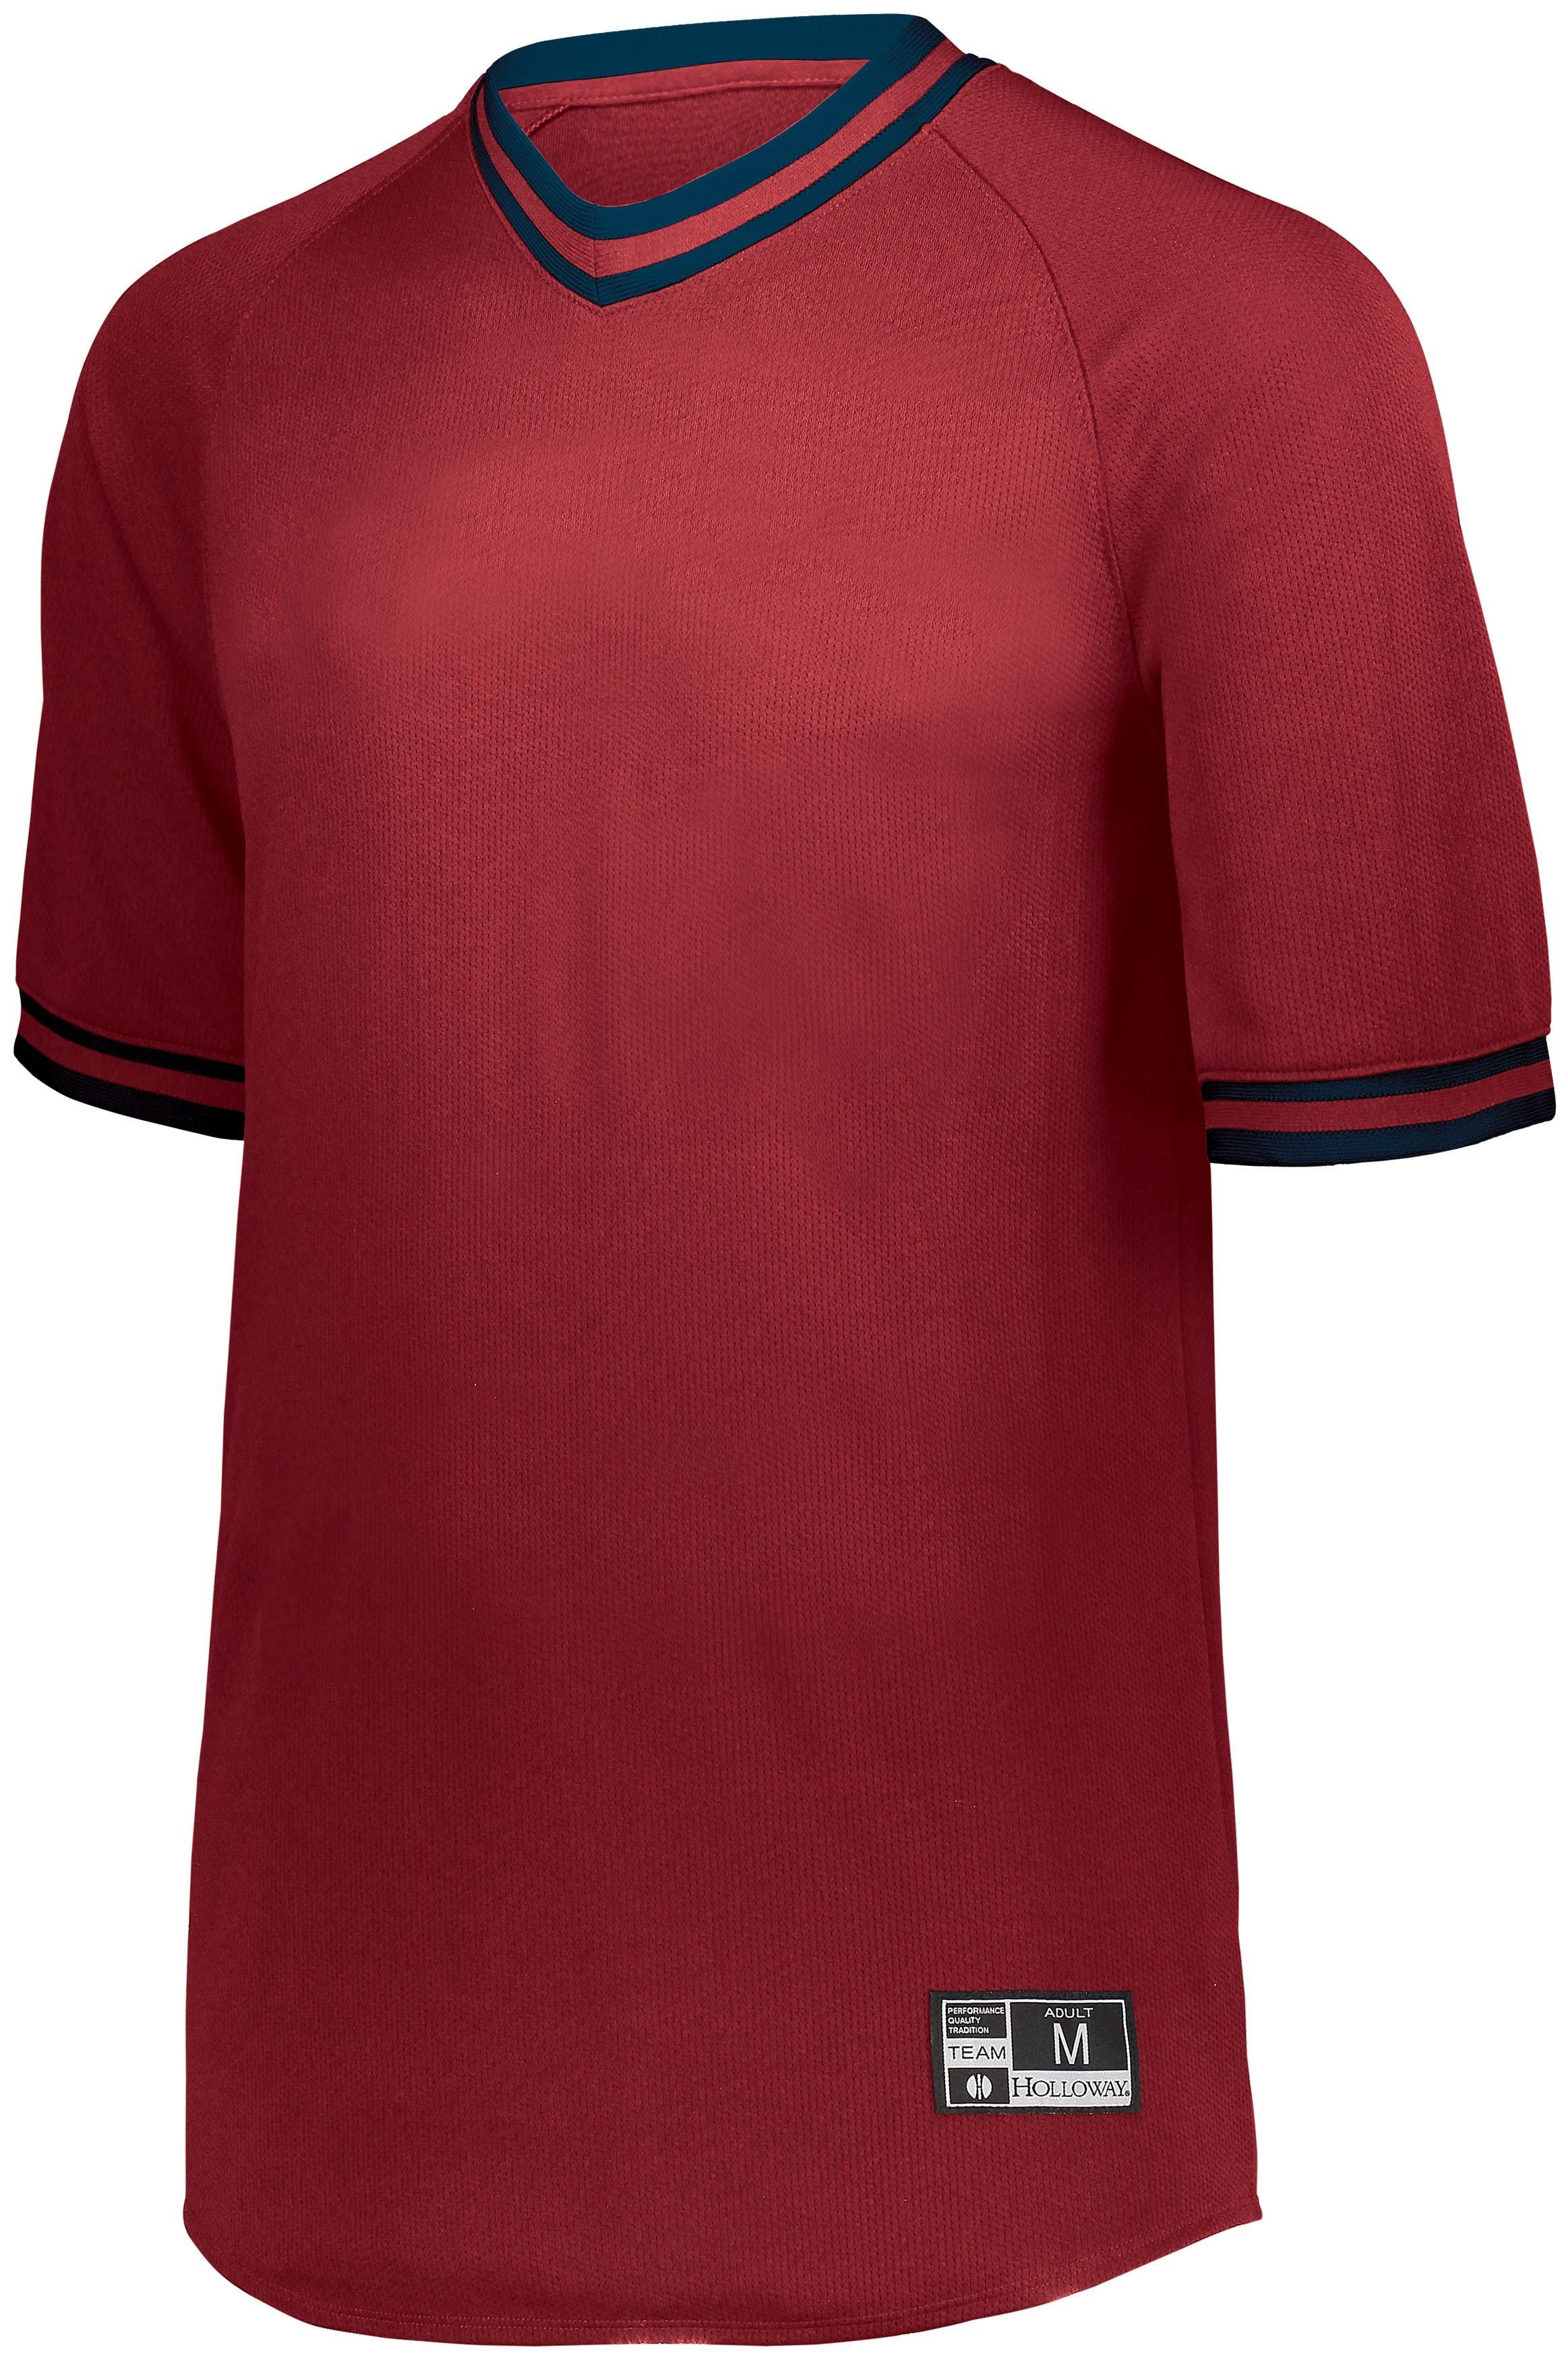 Holloway Retro V-Neck Baseball Jersey in Scarlet/Navy  -Part of the Adult, Adult-Jersey, Baseball, Holloway, Shirts, All-Sports, All-Sports-1 product lines at KanaleyCreations.com